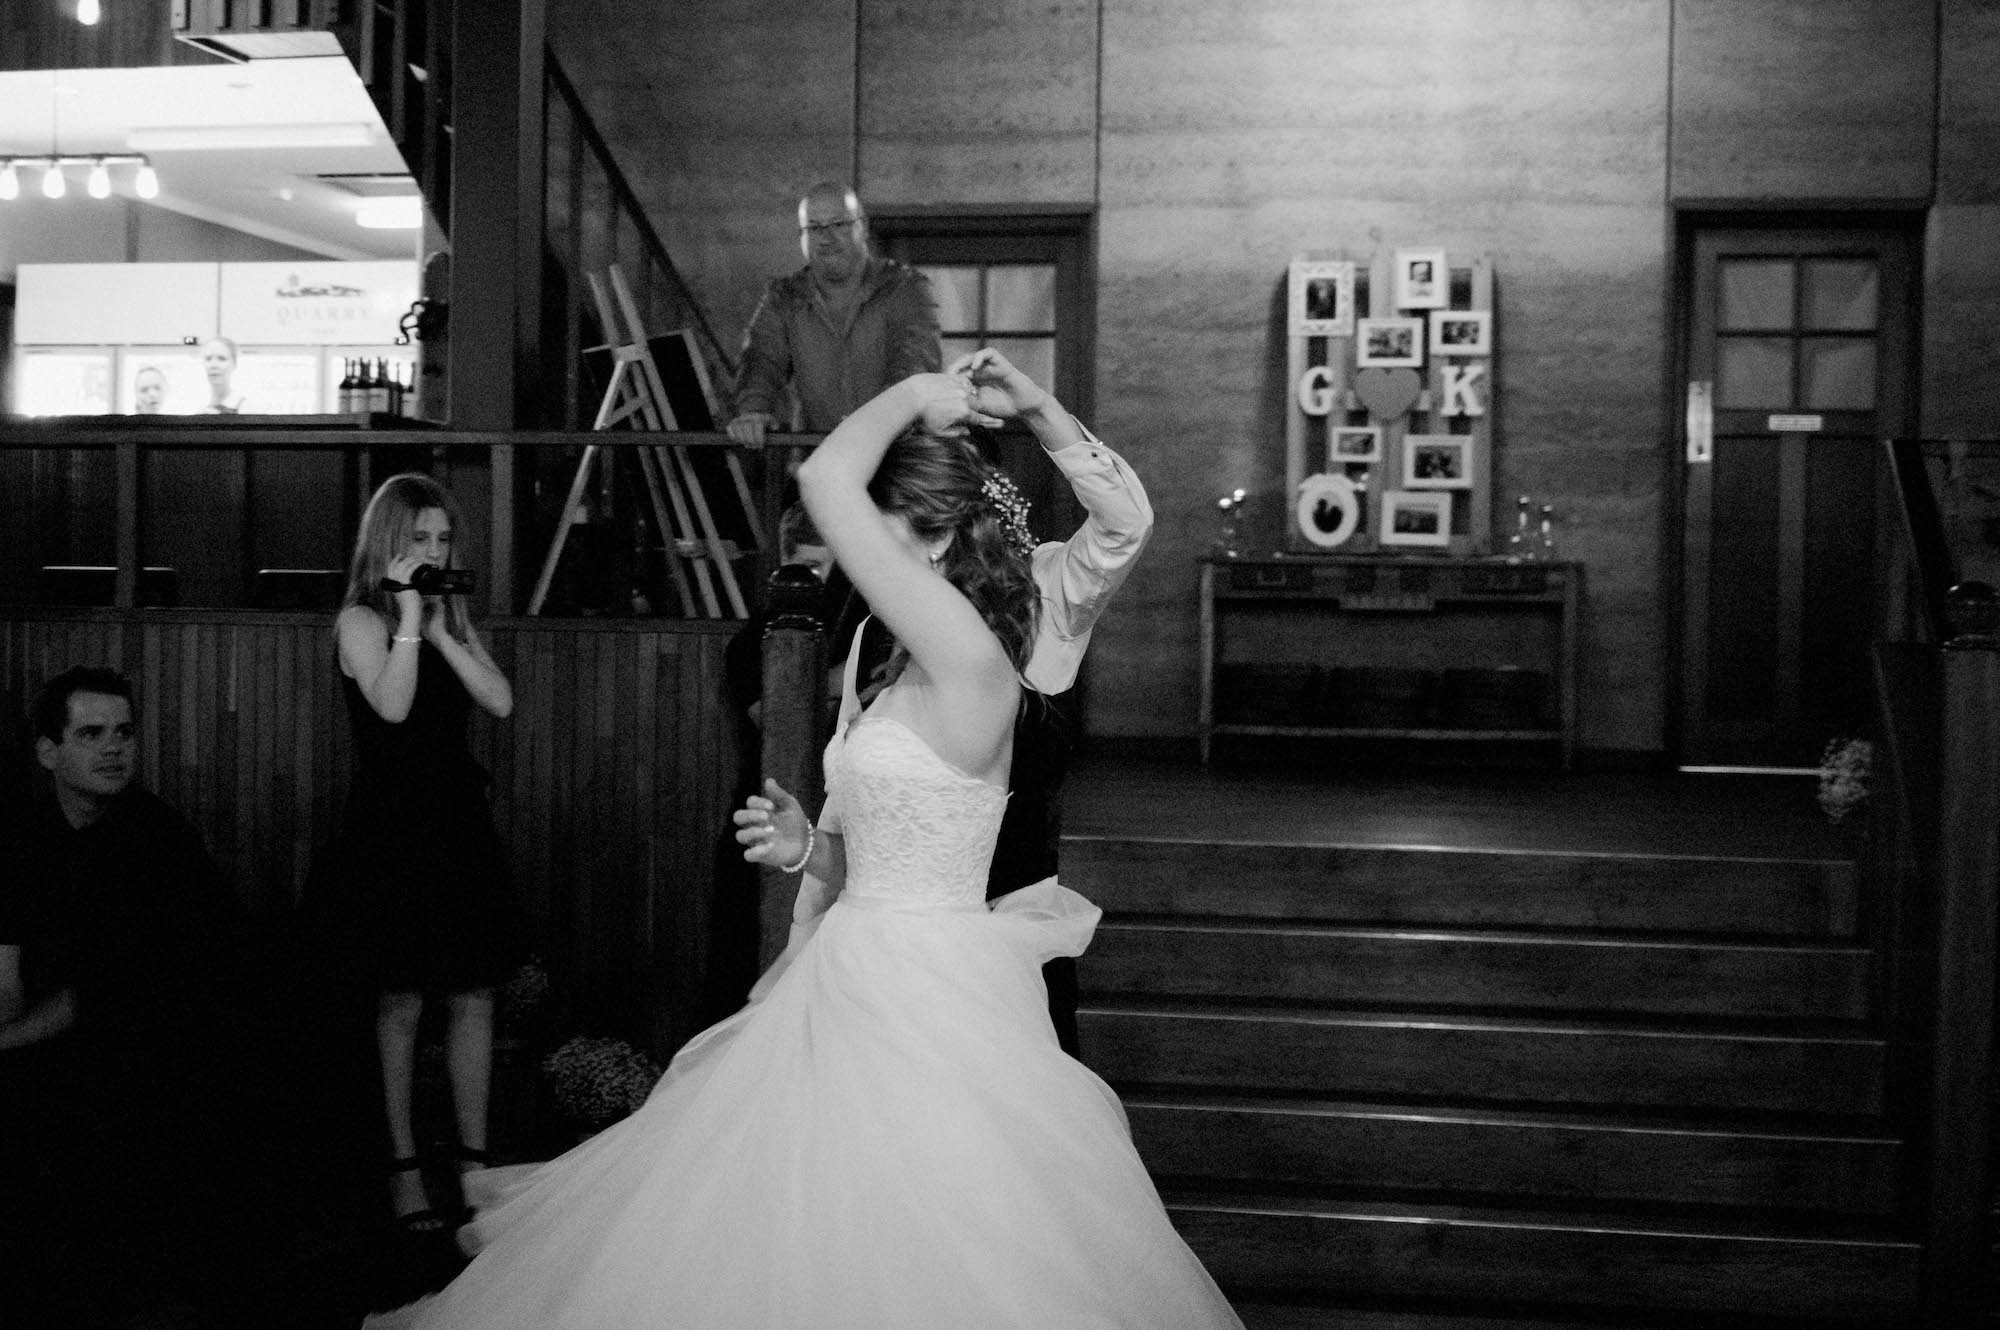 The groom spins his bride during their first dance at Quarry Farm.